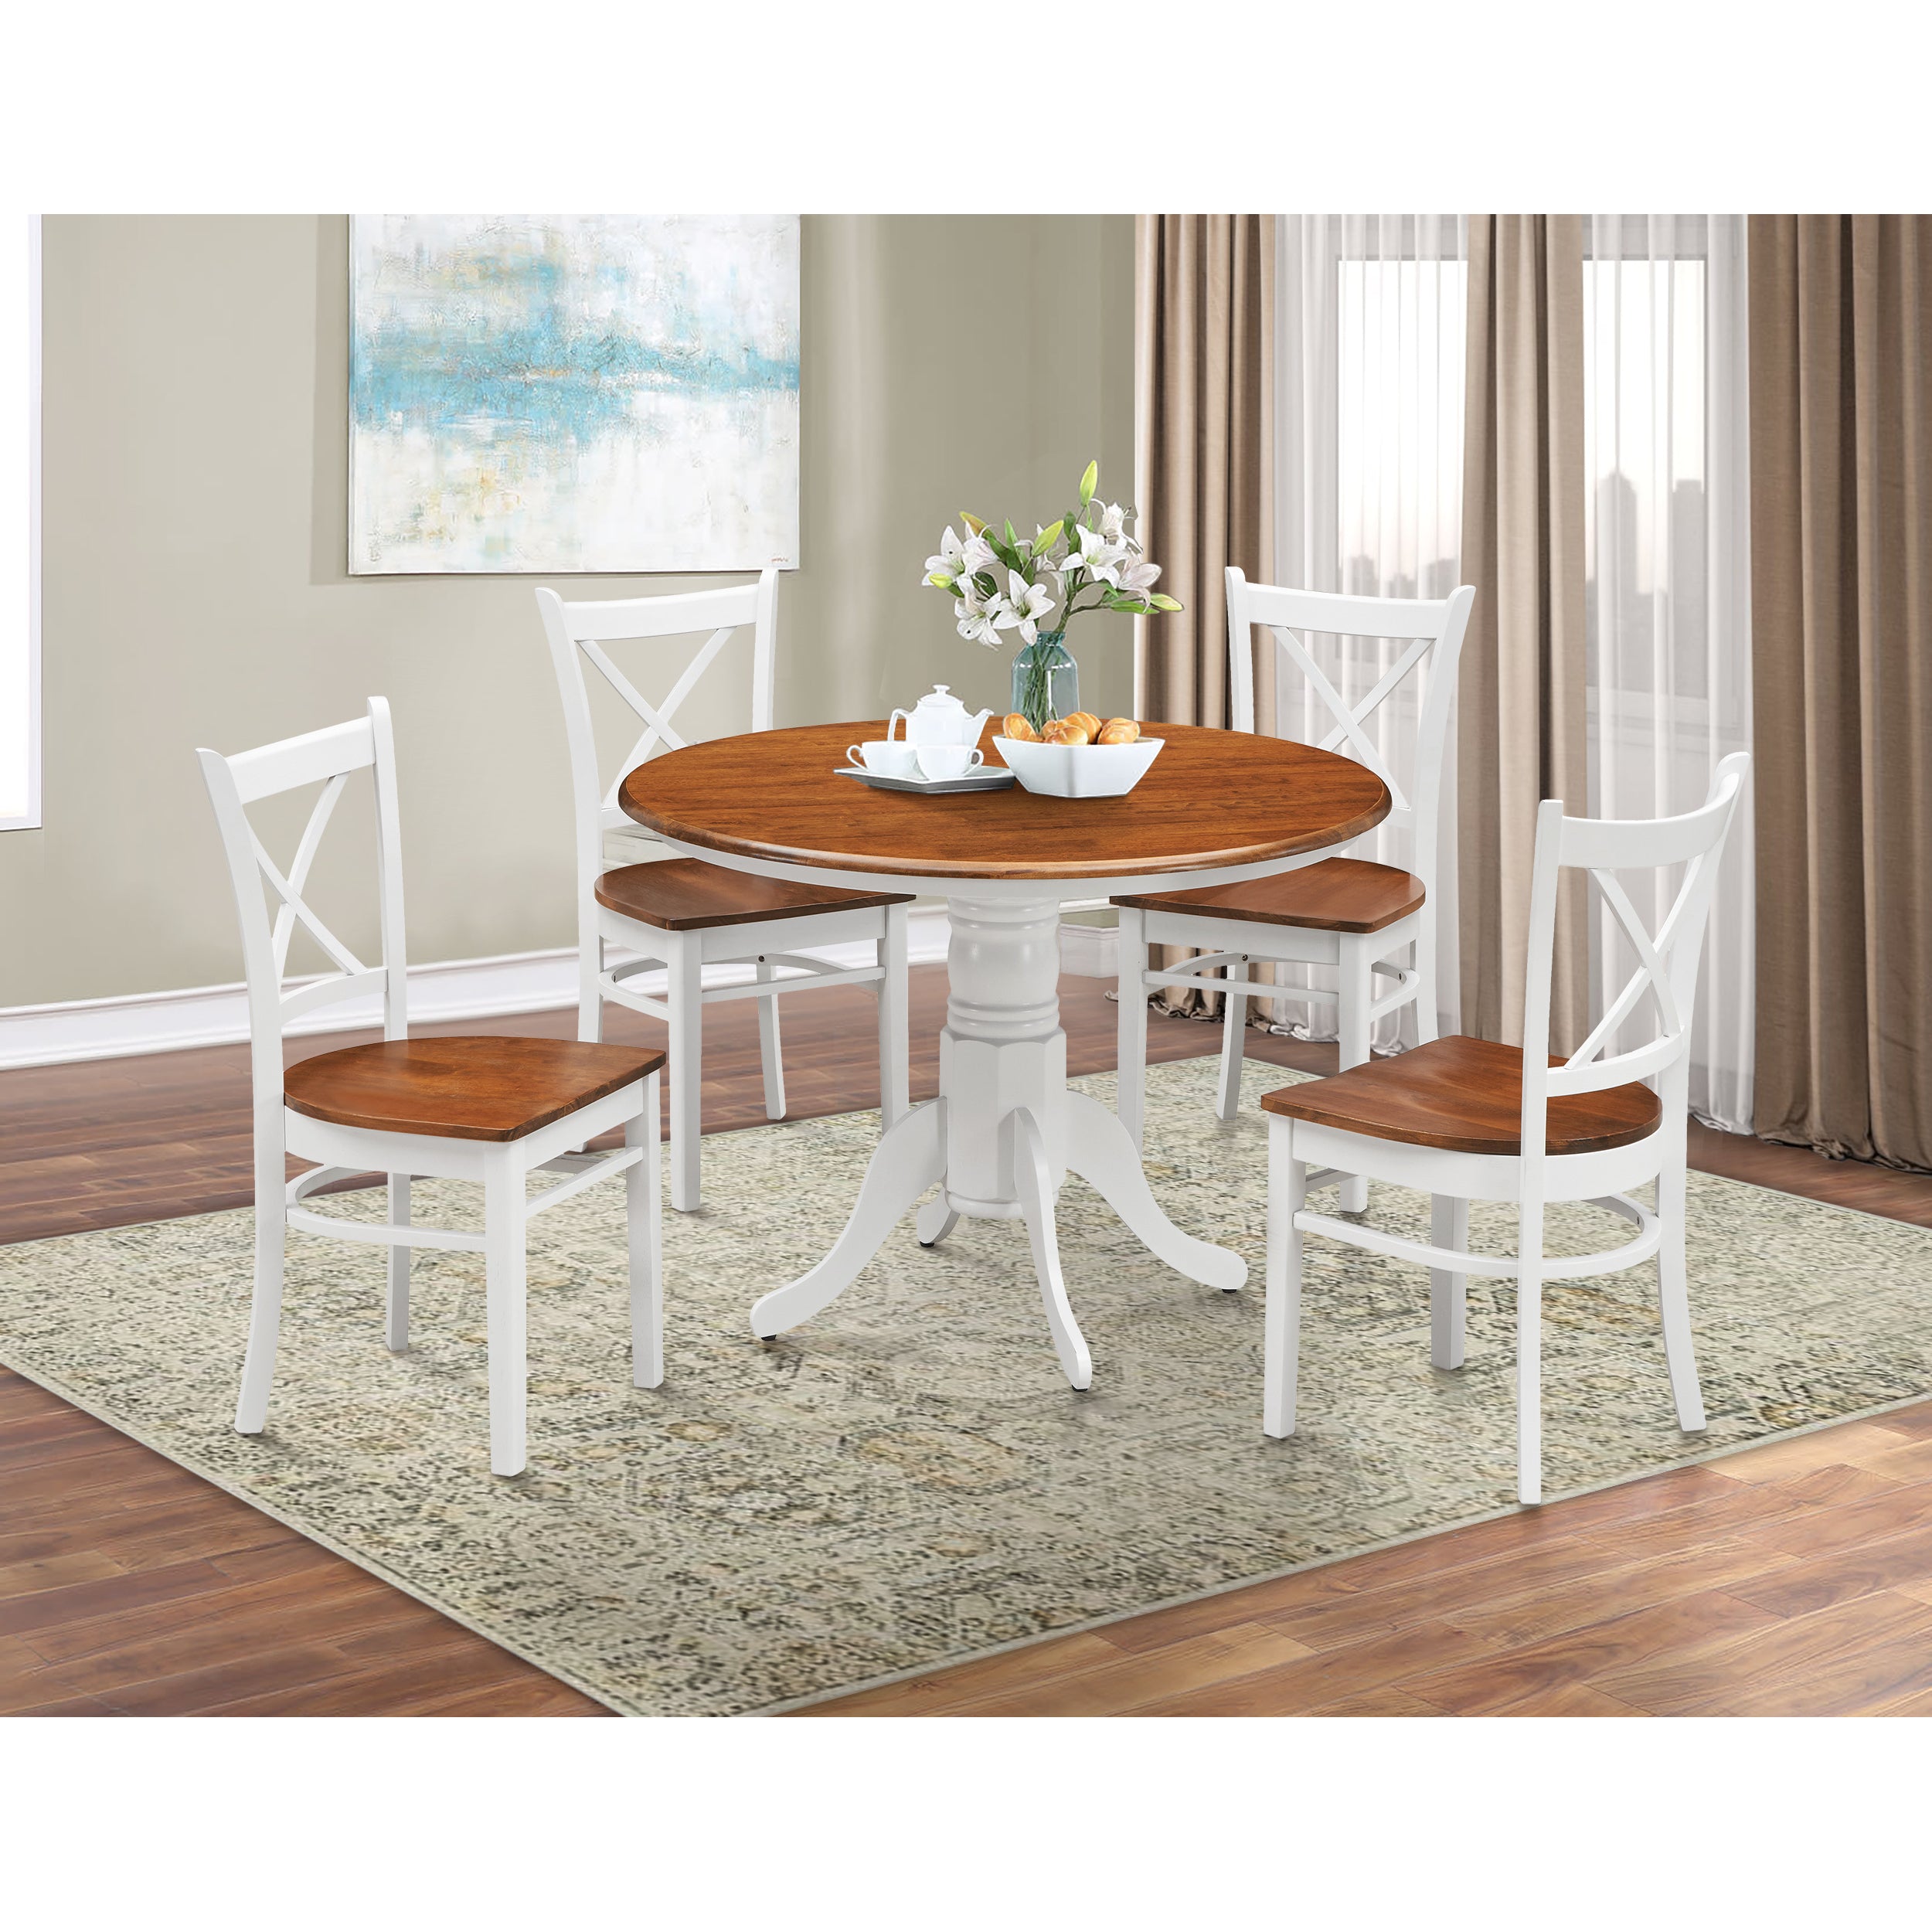 Lupin 5pc Dining Set 106cm Round Pedestral Table 4 Rubber Wood Chair - White Oak - SILBERSHELL